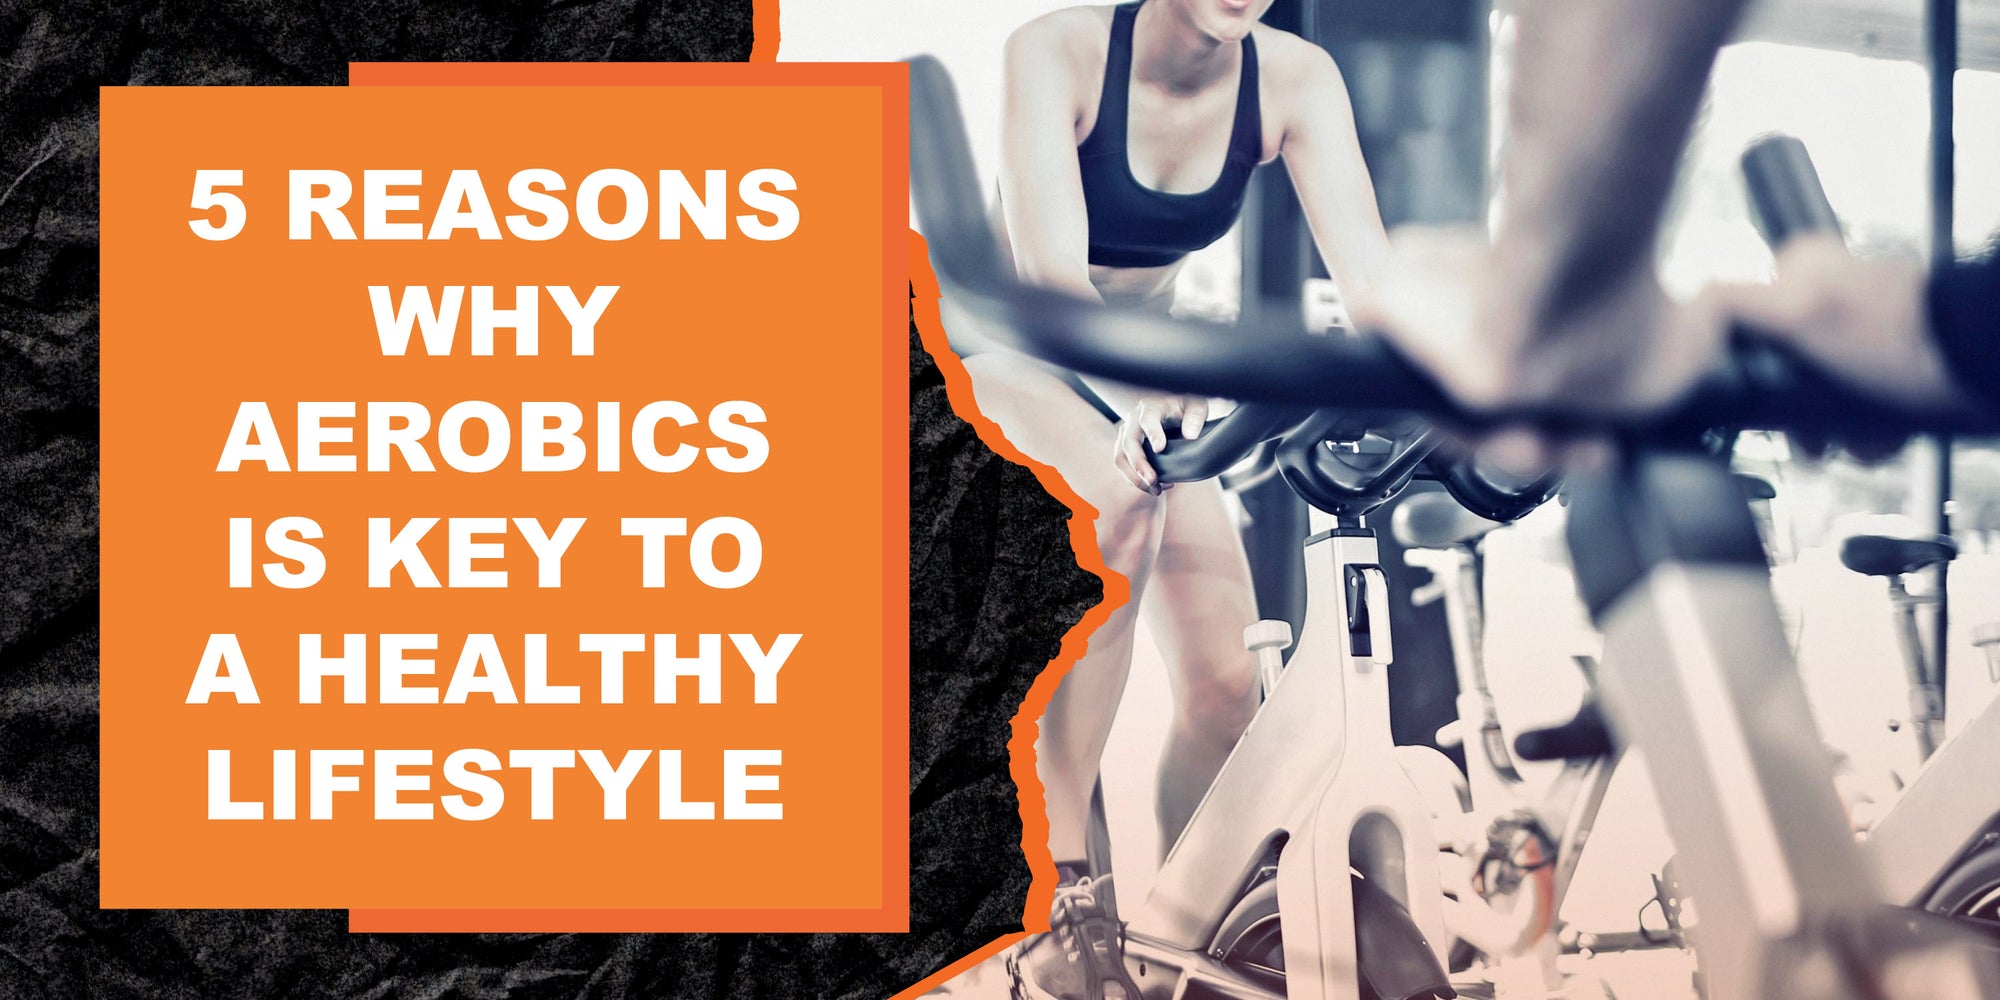 5 Reasons Why Aerobics is Key to a Healthy Lifestyle